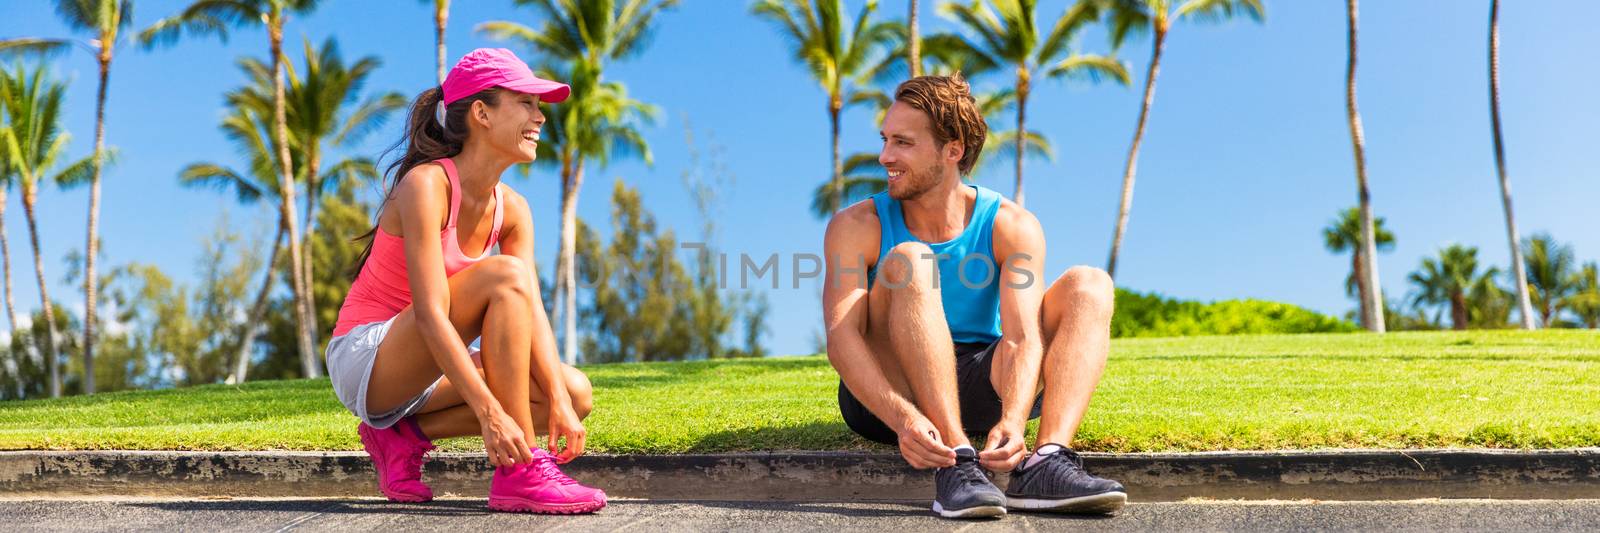 Runners couple tying running shoes to run banner. Runner woman and athlete man lacing shoe laces at park. Healthy lifestyle jogging motivation, happy healthy people. Horizontal landscape crop.